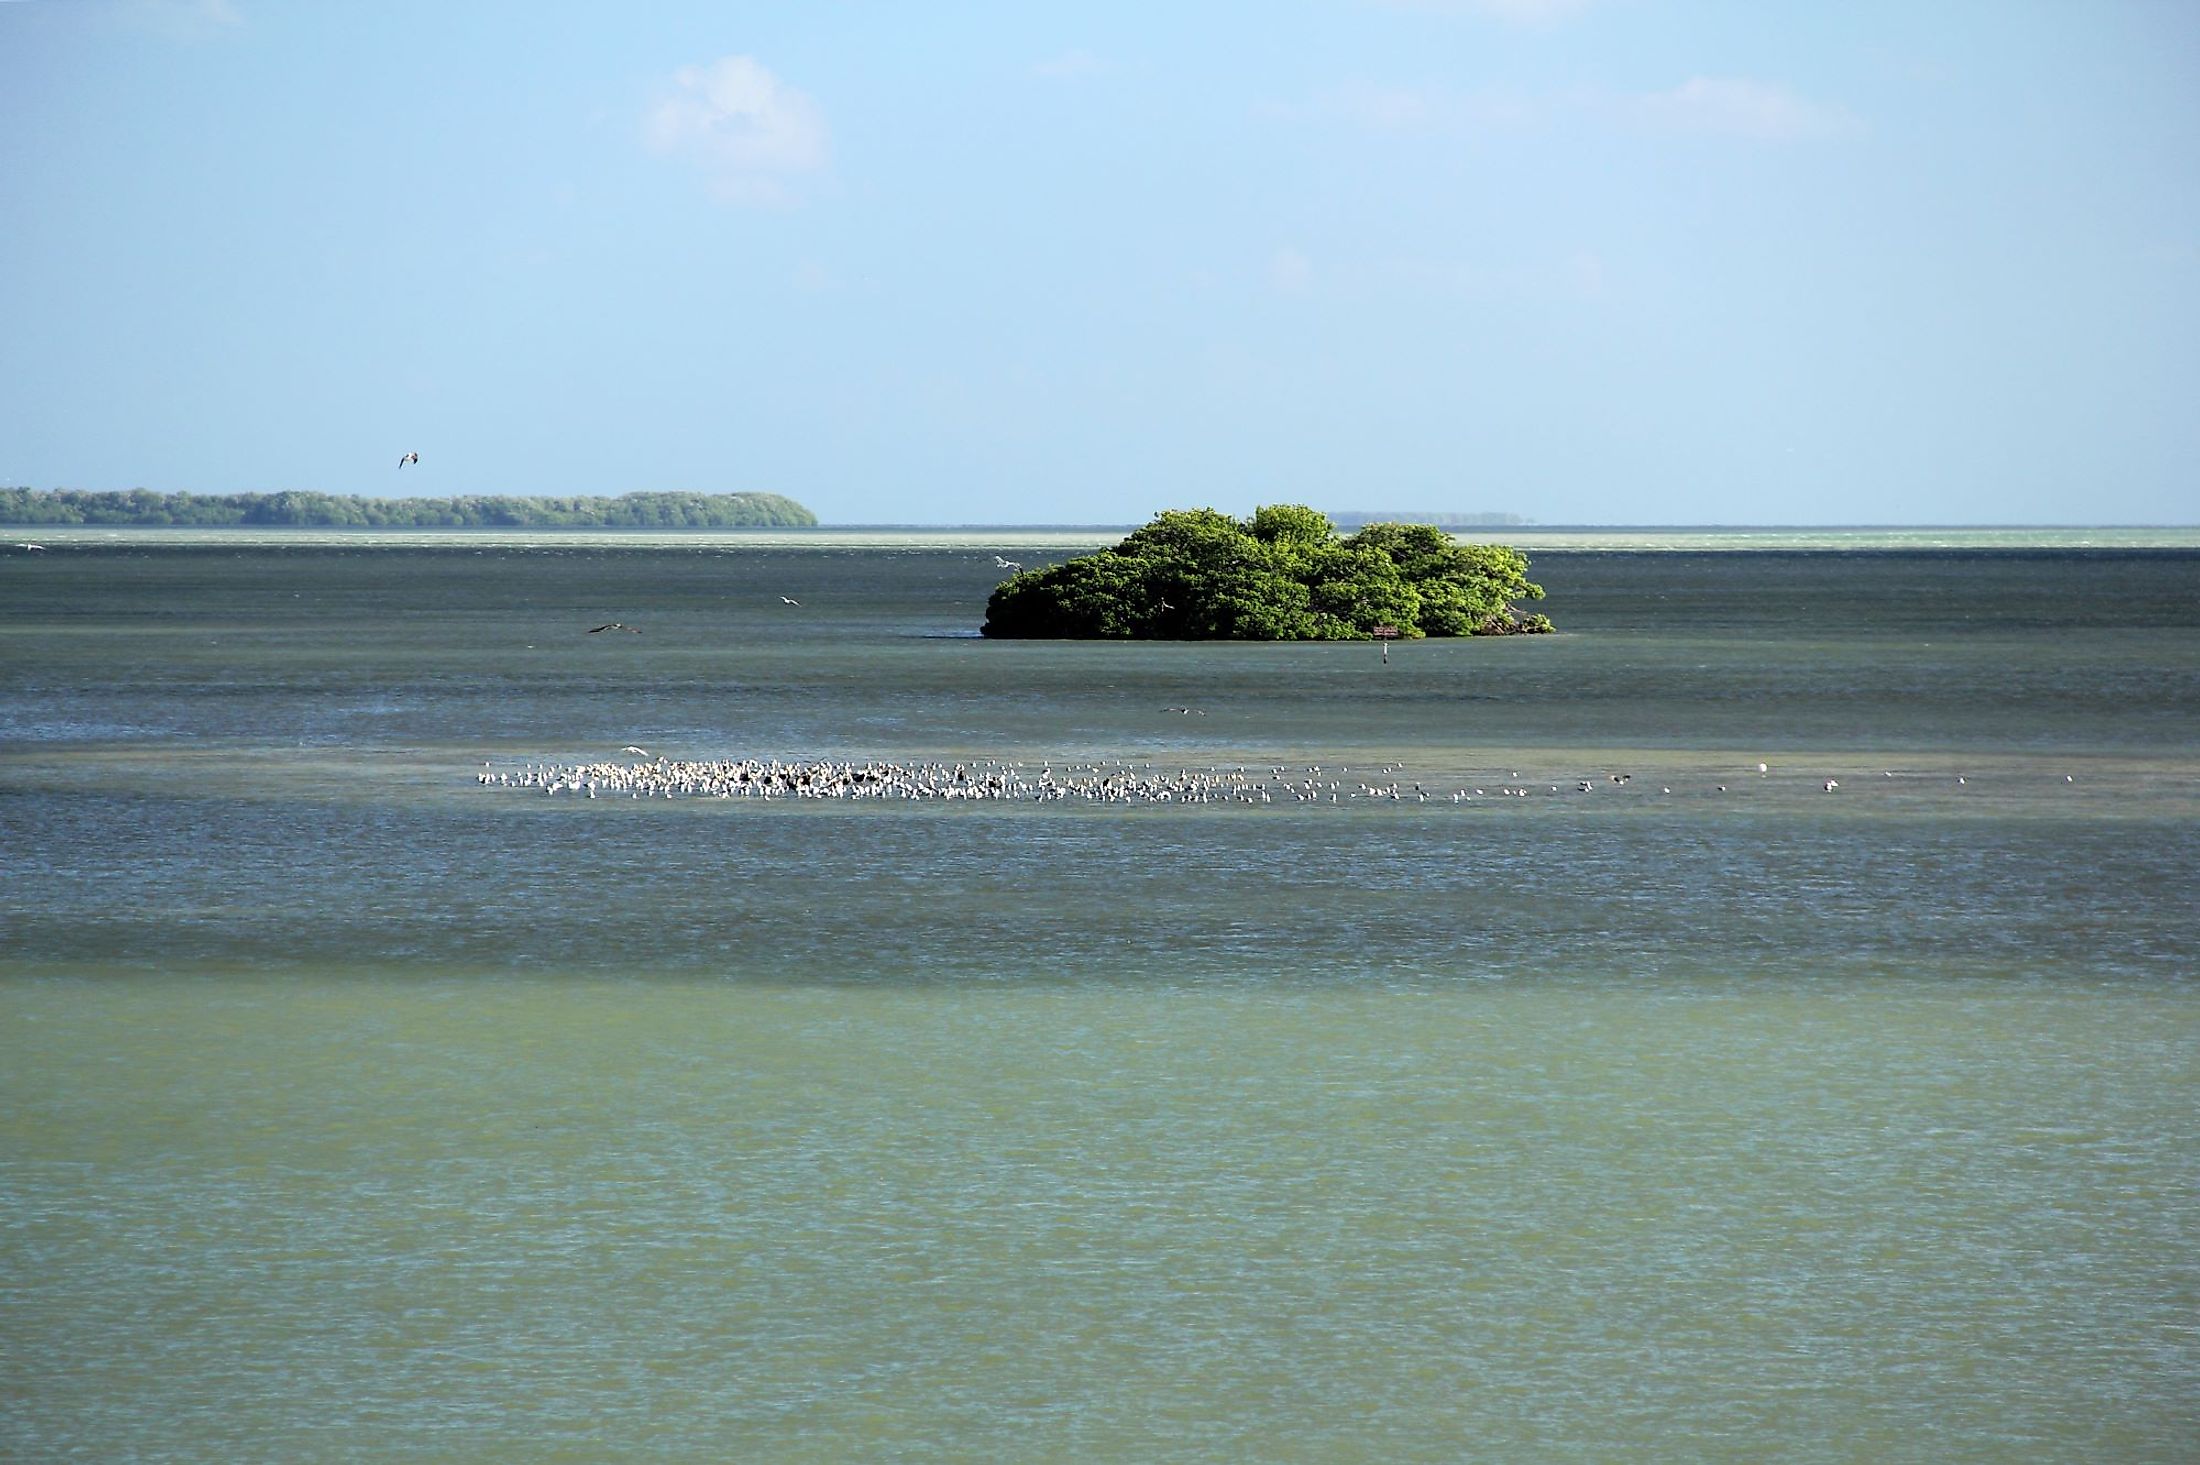 Seascape of Florida Bay as viewed from the Flamingo Visitor Center in Everglades National Park